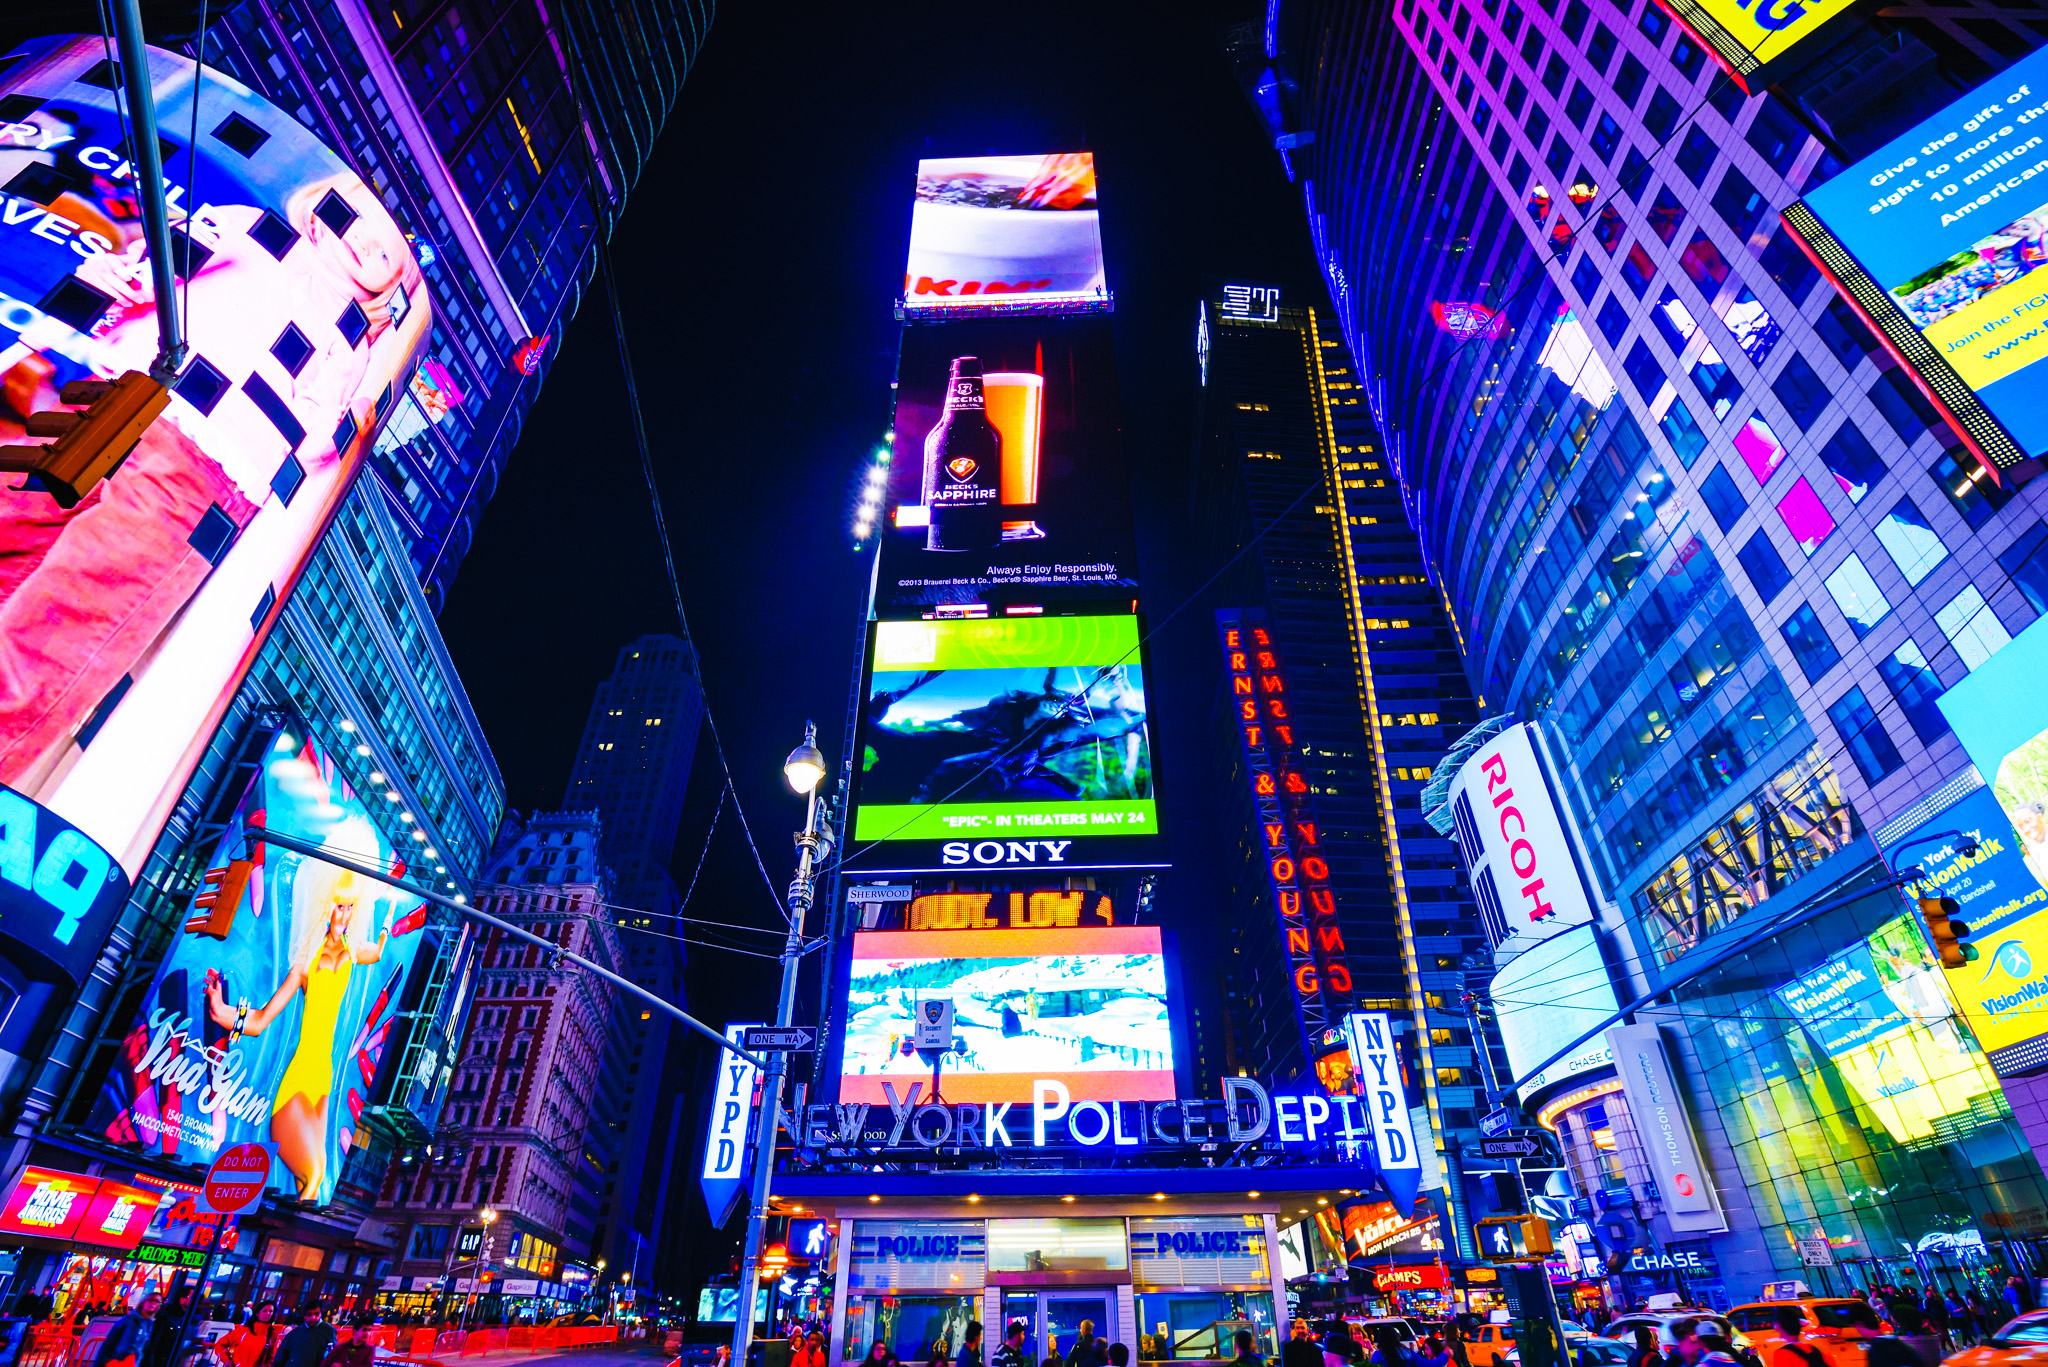 Photo of Times Square, New York City at night, looking up at the billboards